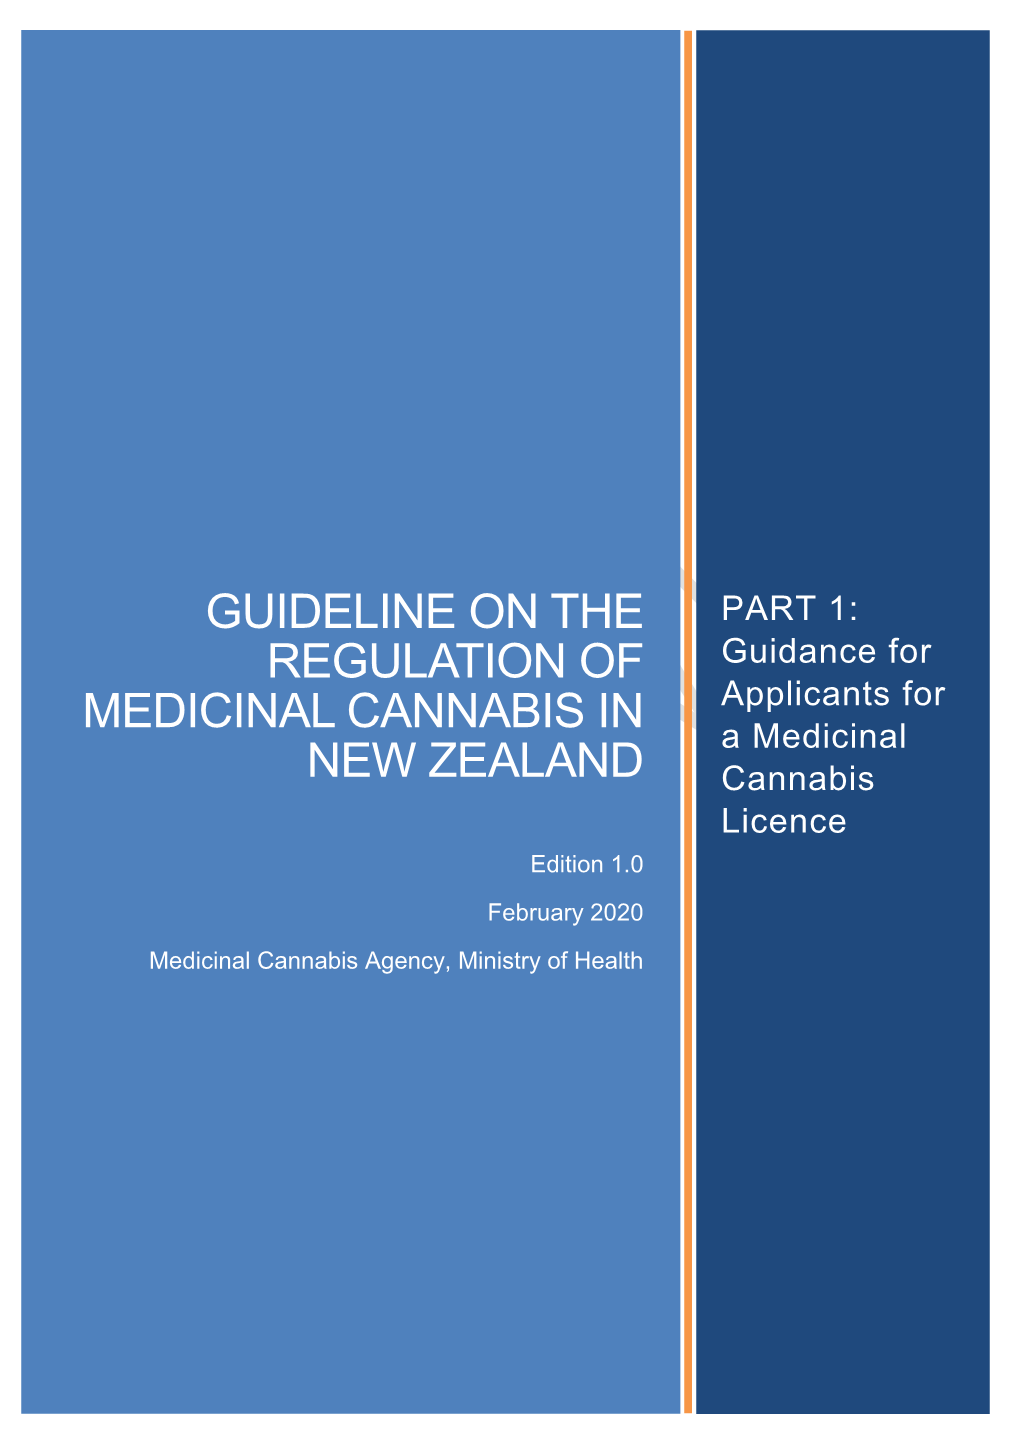 Guideline on the Regulation of Medicinal Cannabis in New Zealand